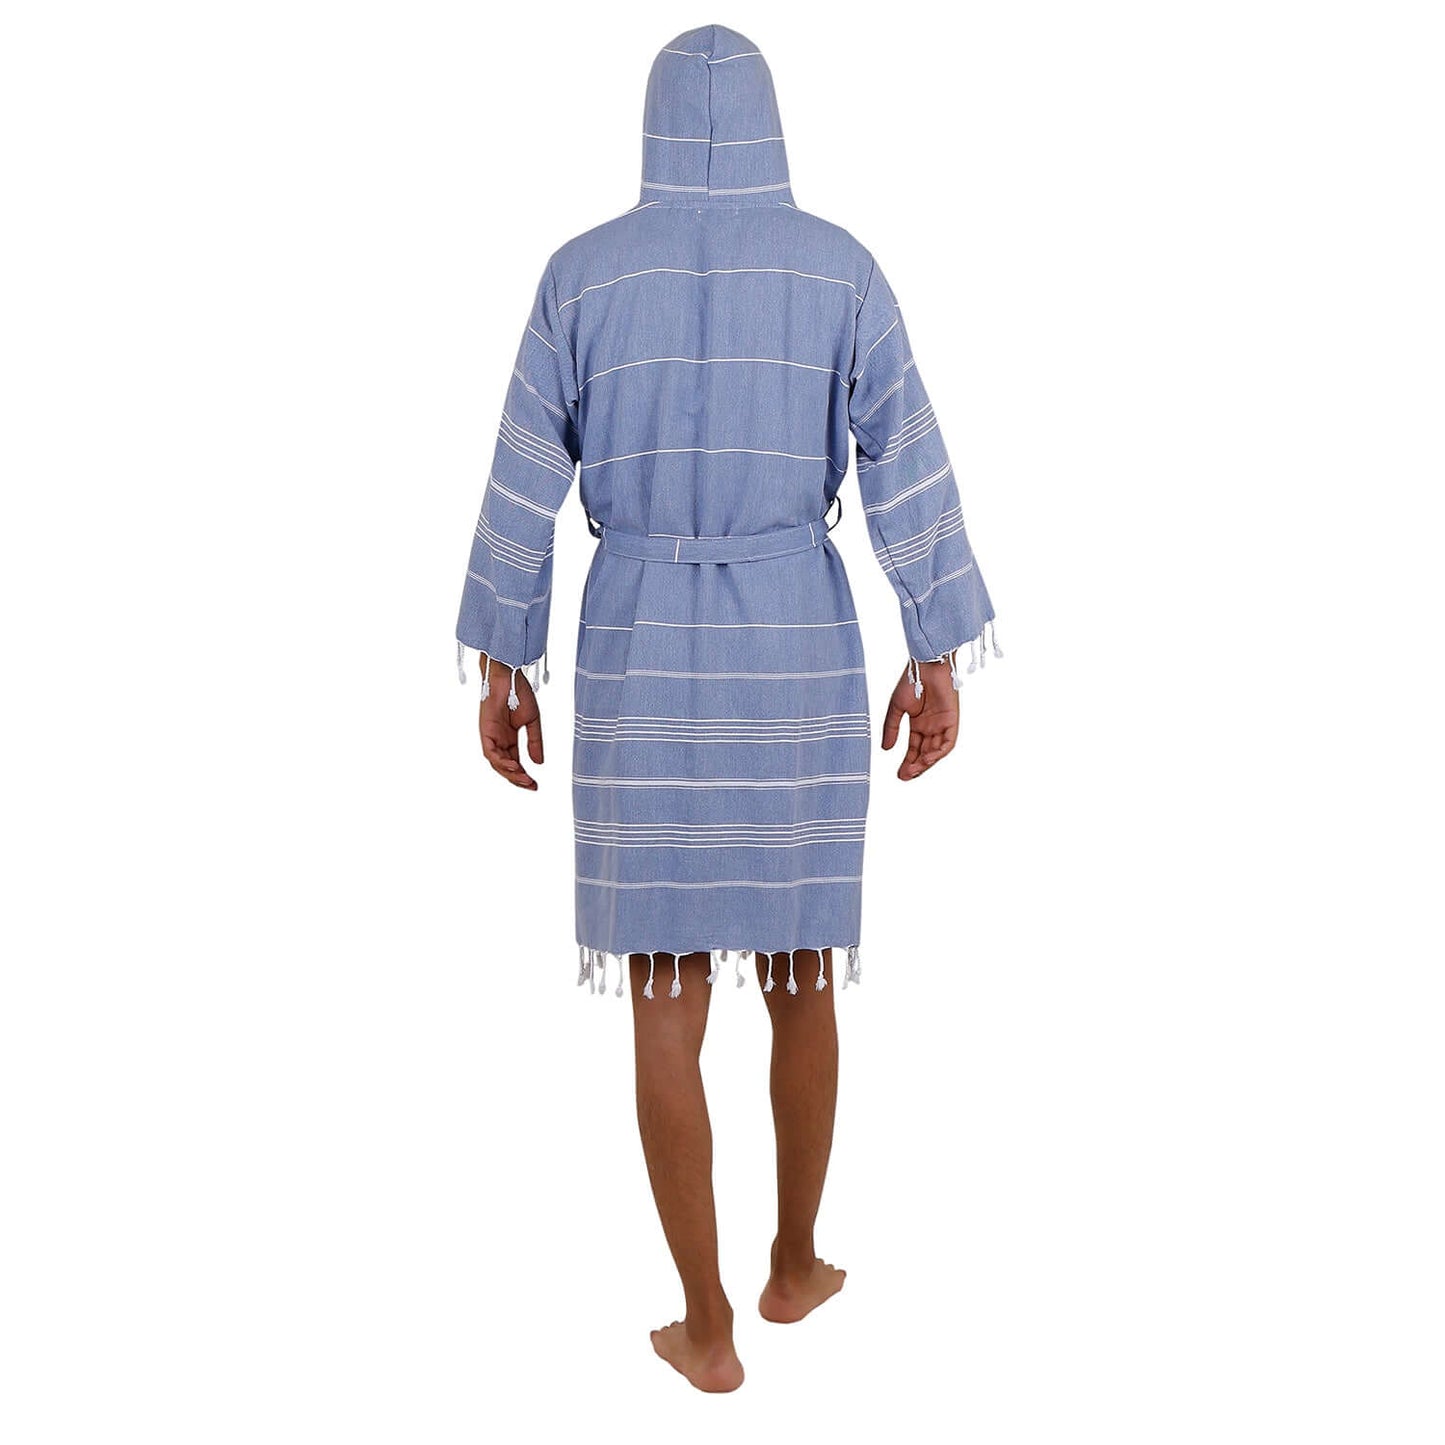 Rear view of the man wearing Loom Legacy xsmall/small blue bathrobe showcasing the hood, white stripe pattern, and fringe detailing at the bottom.